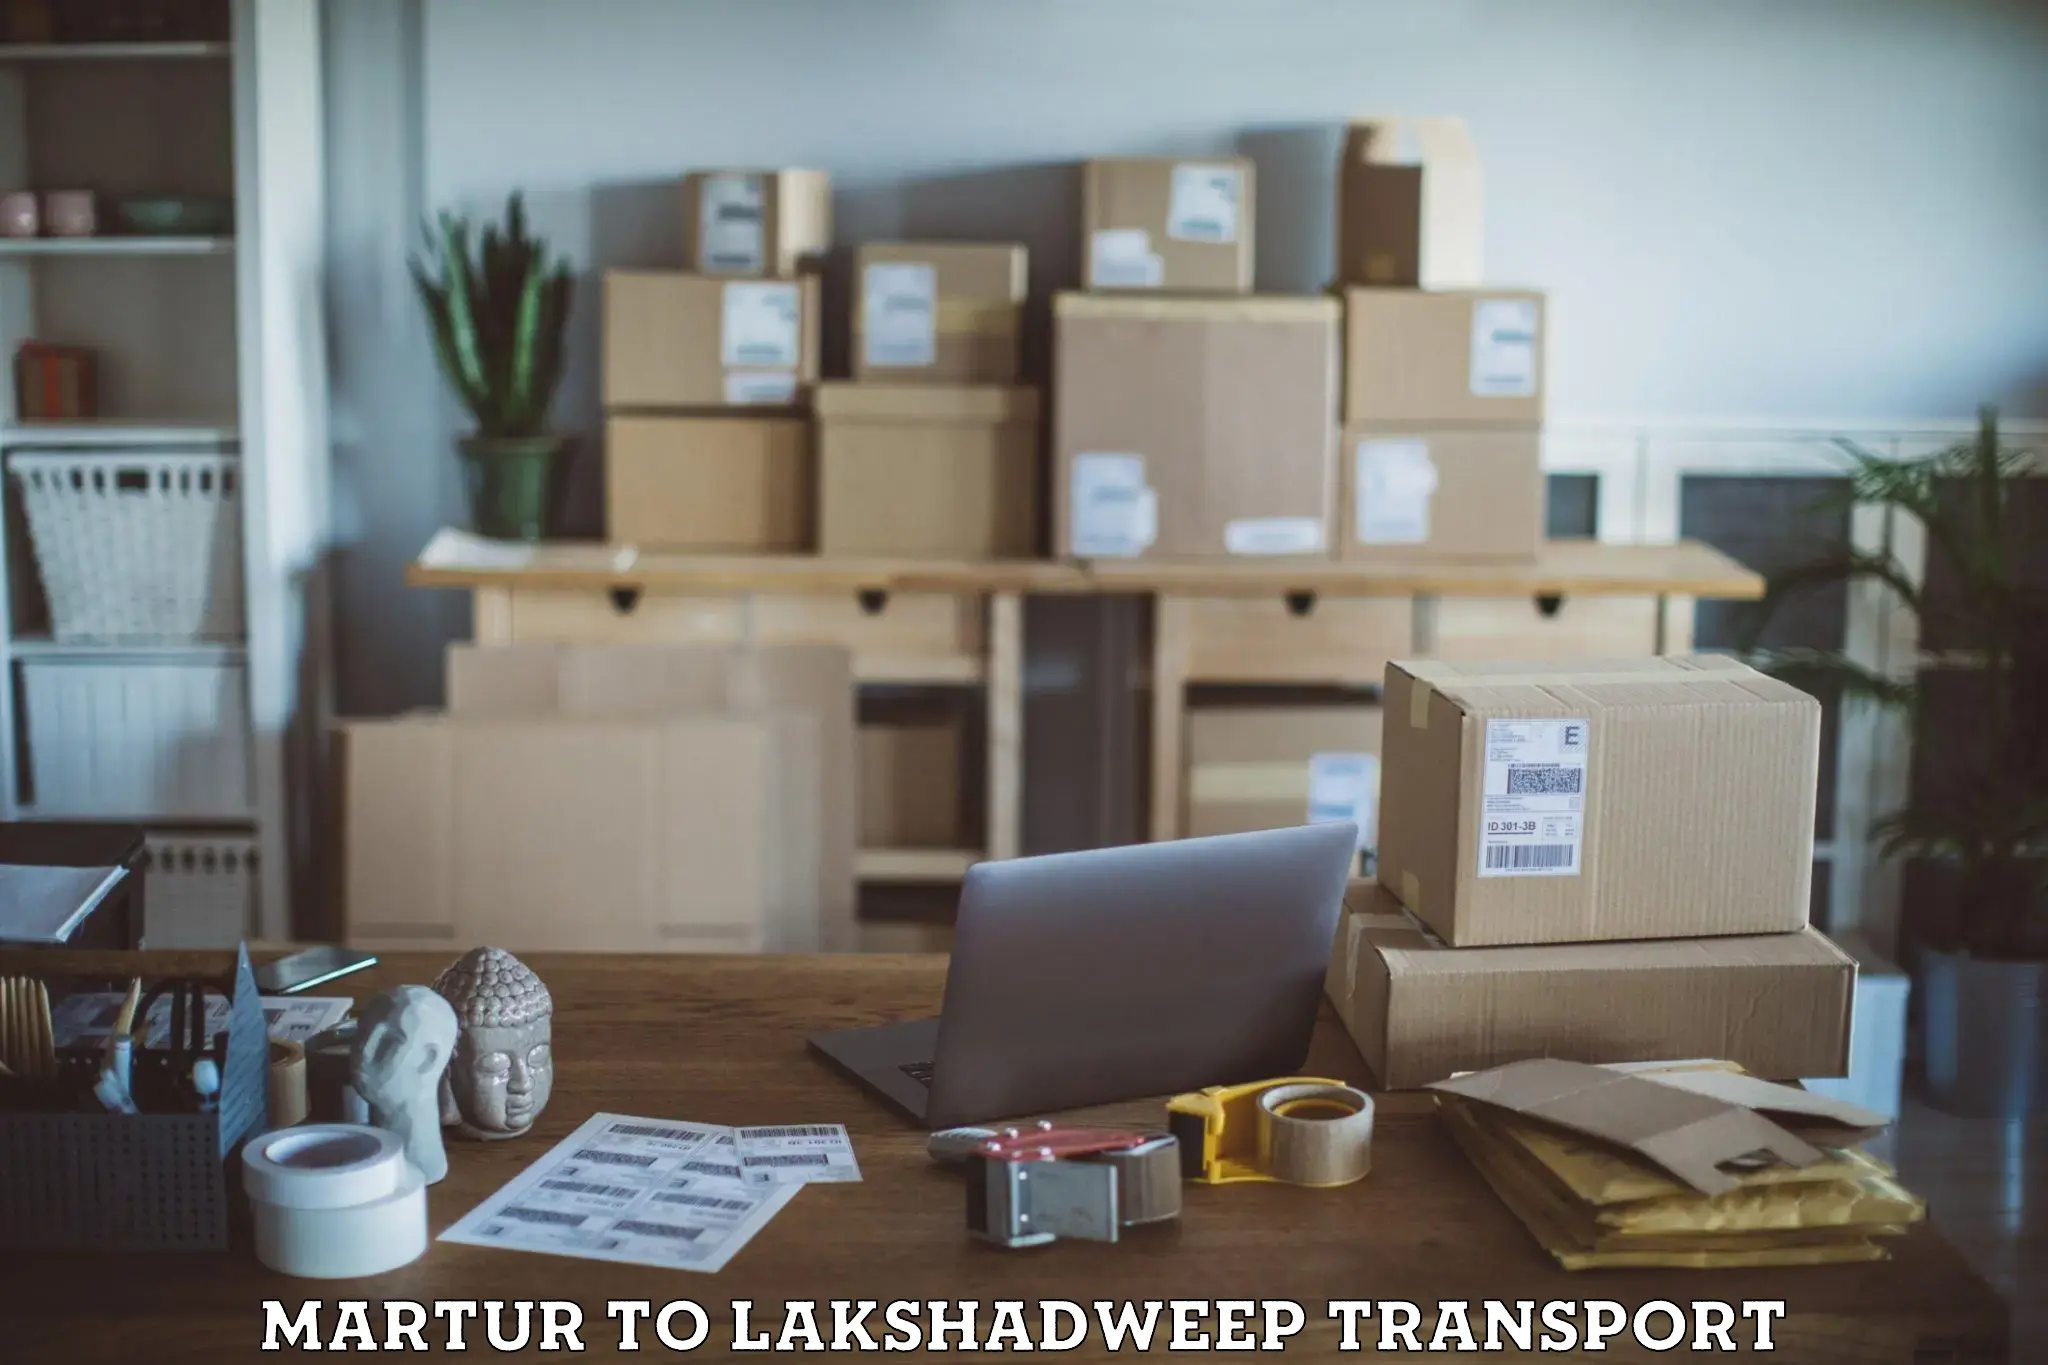 Domestic transport services Martur to Lakshadweep